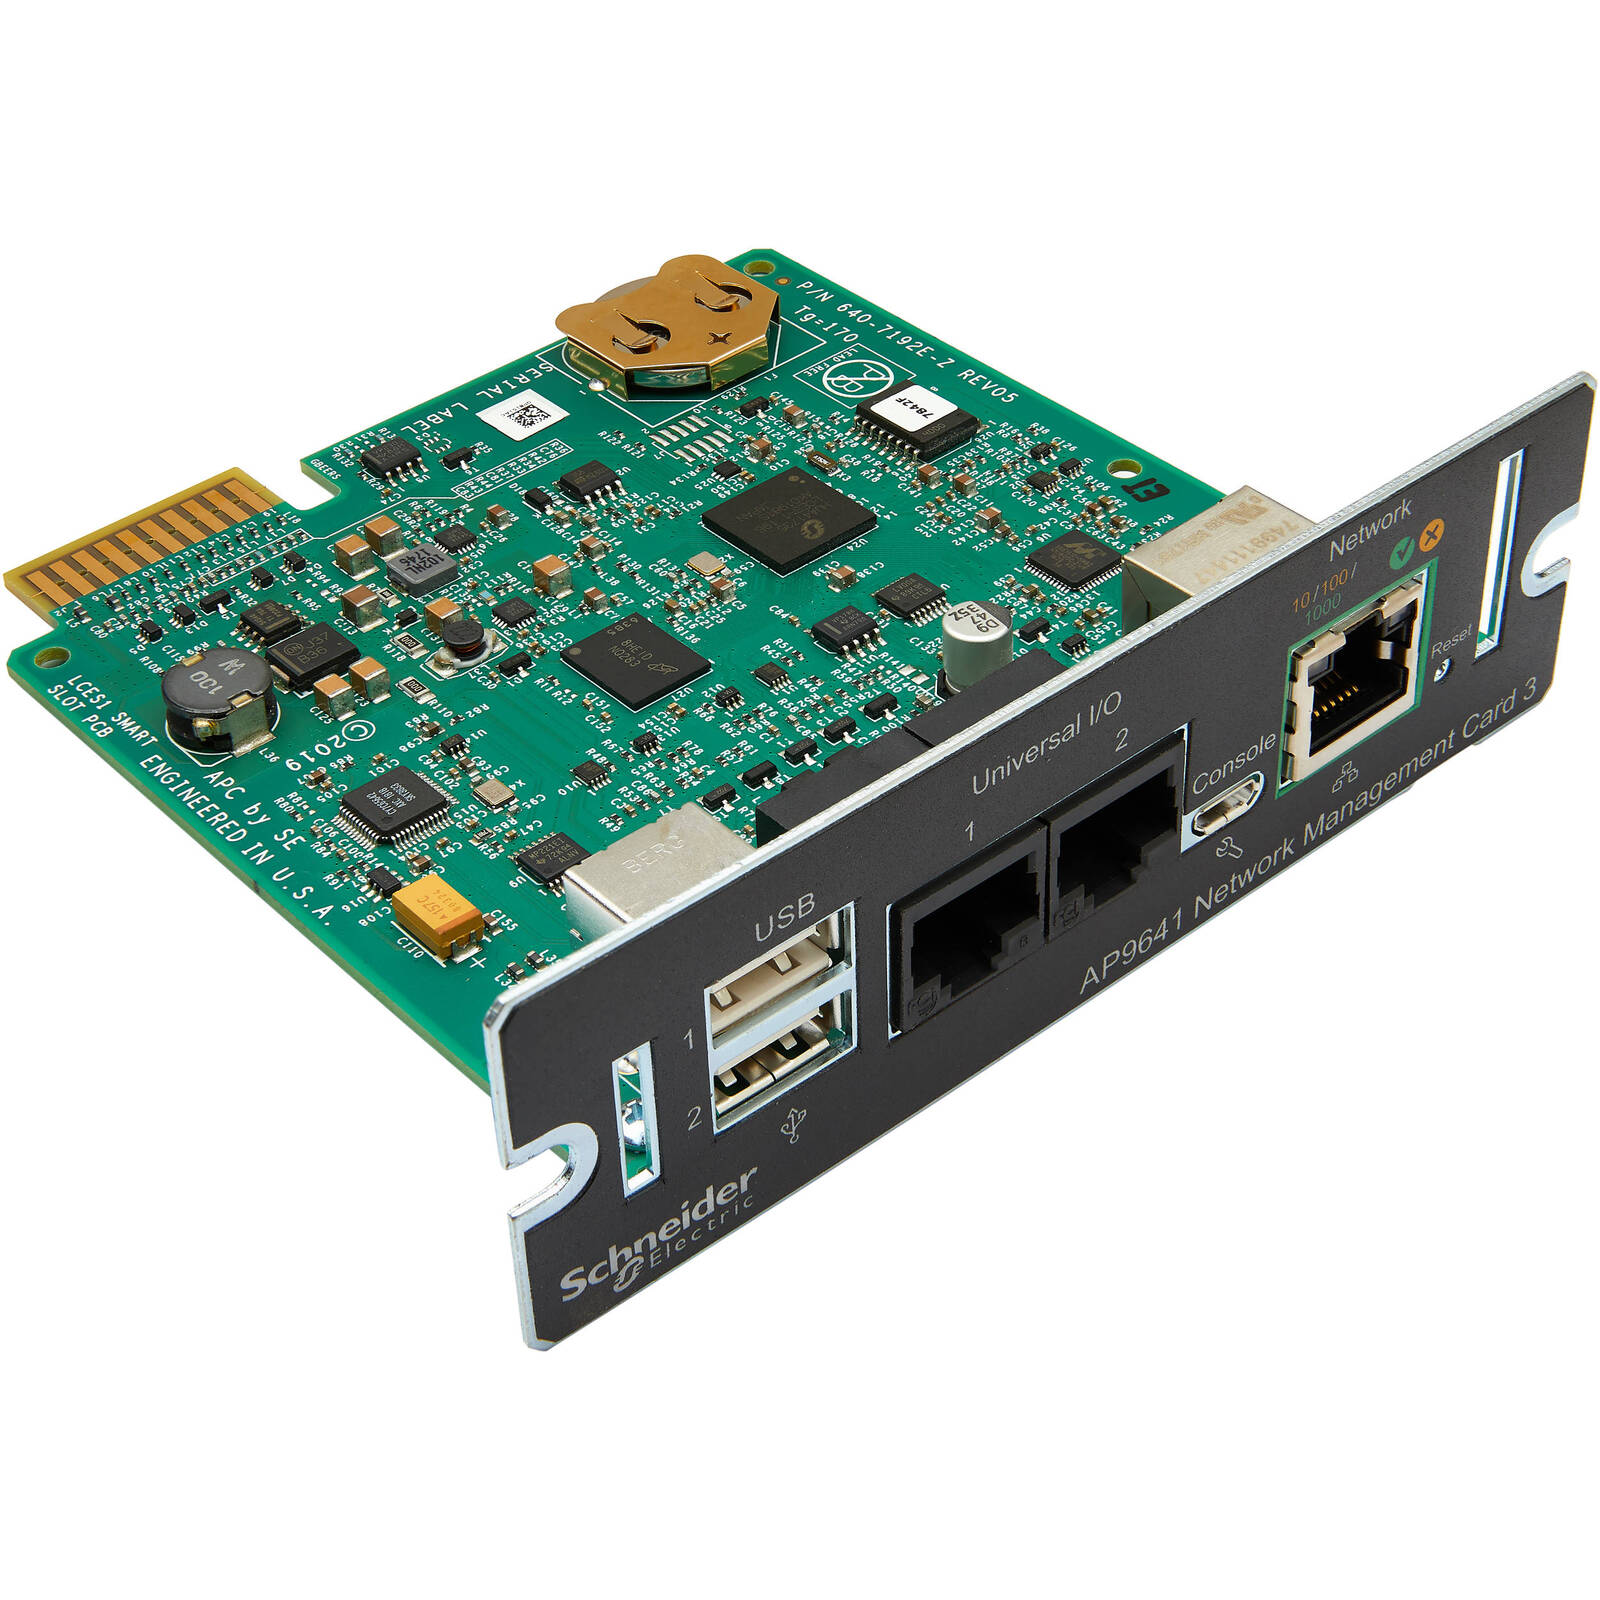 APC UPS Network Management Card 3 with 2 USB Ports and Temperature Monitoring, Newest Model 2020 (AP9641)